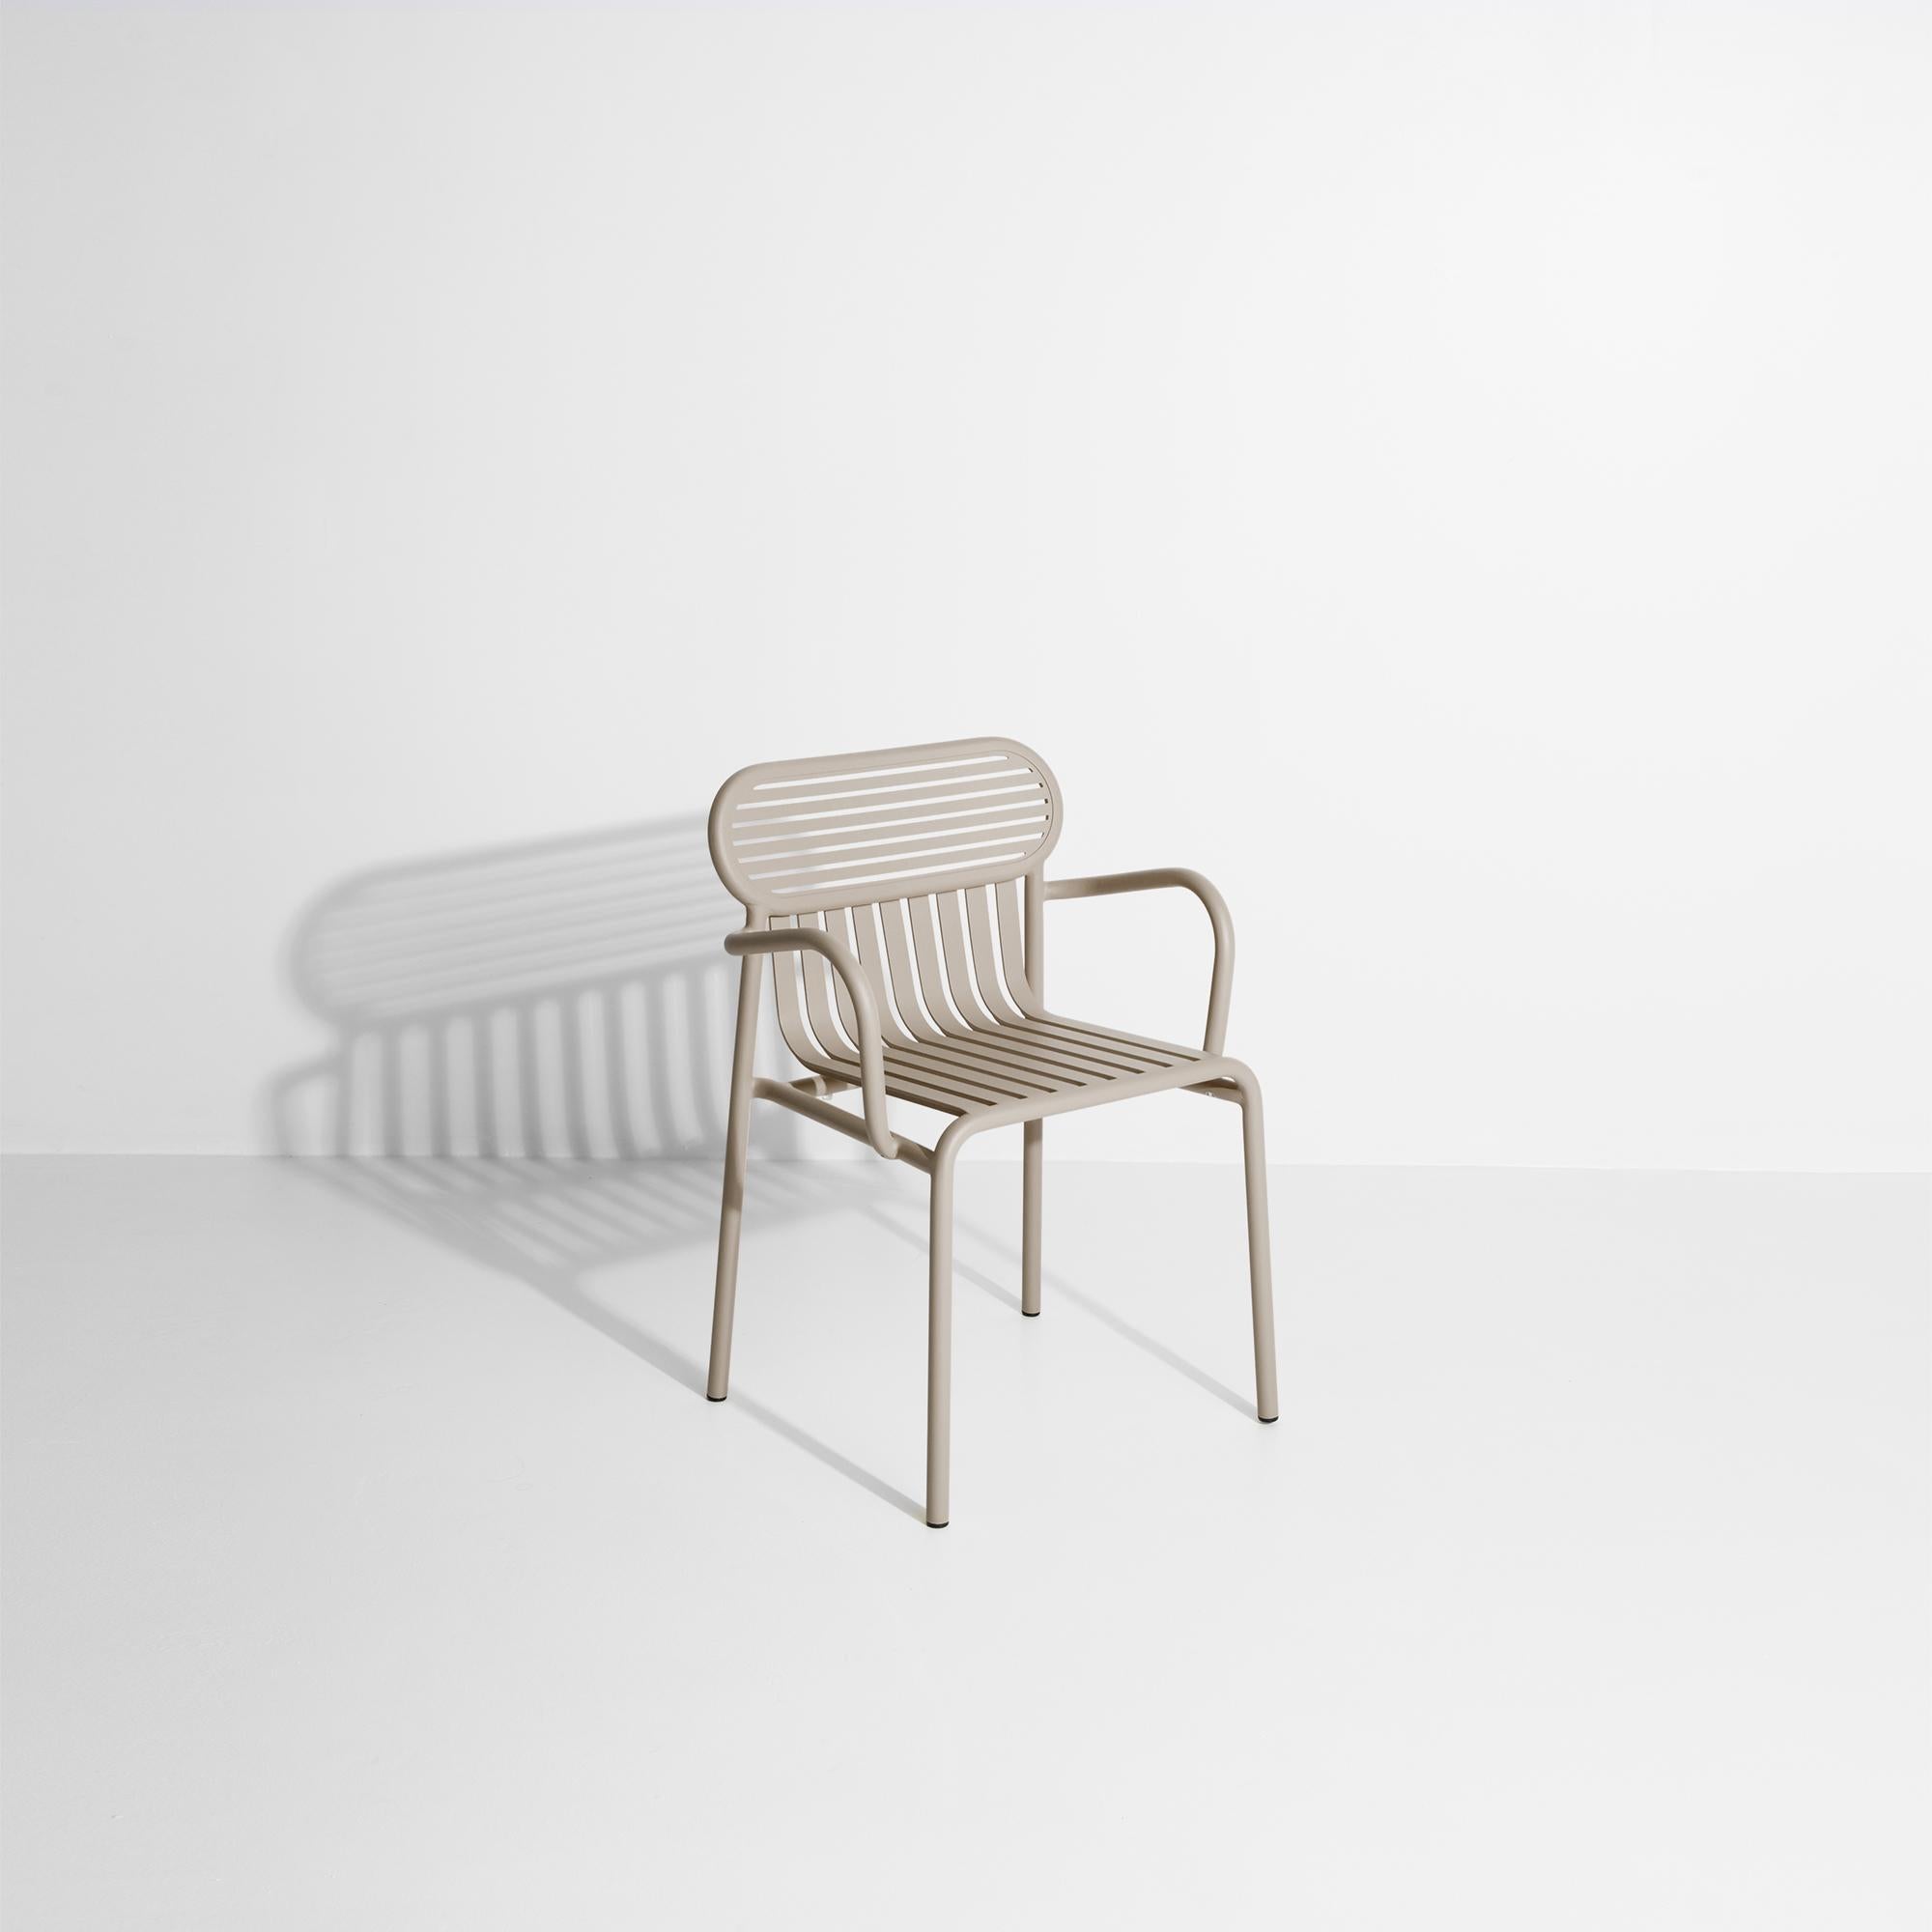 Petite Friture Week-End Bridge Chair in Dune Aluminium by Studio BrichetZiegler In New Condition For Sale In Brooklyn, NY